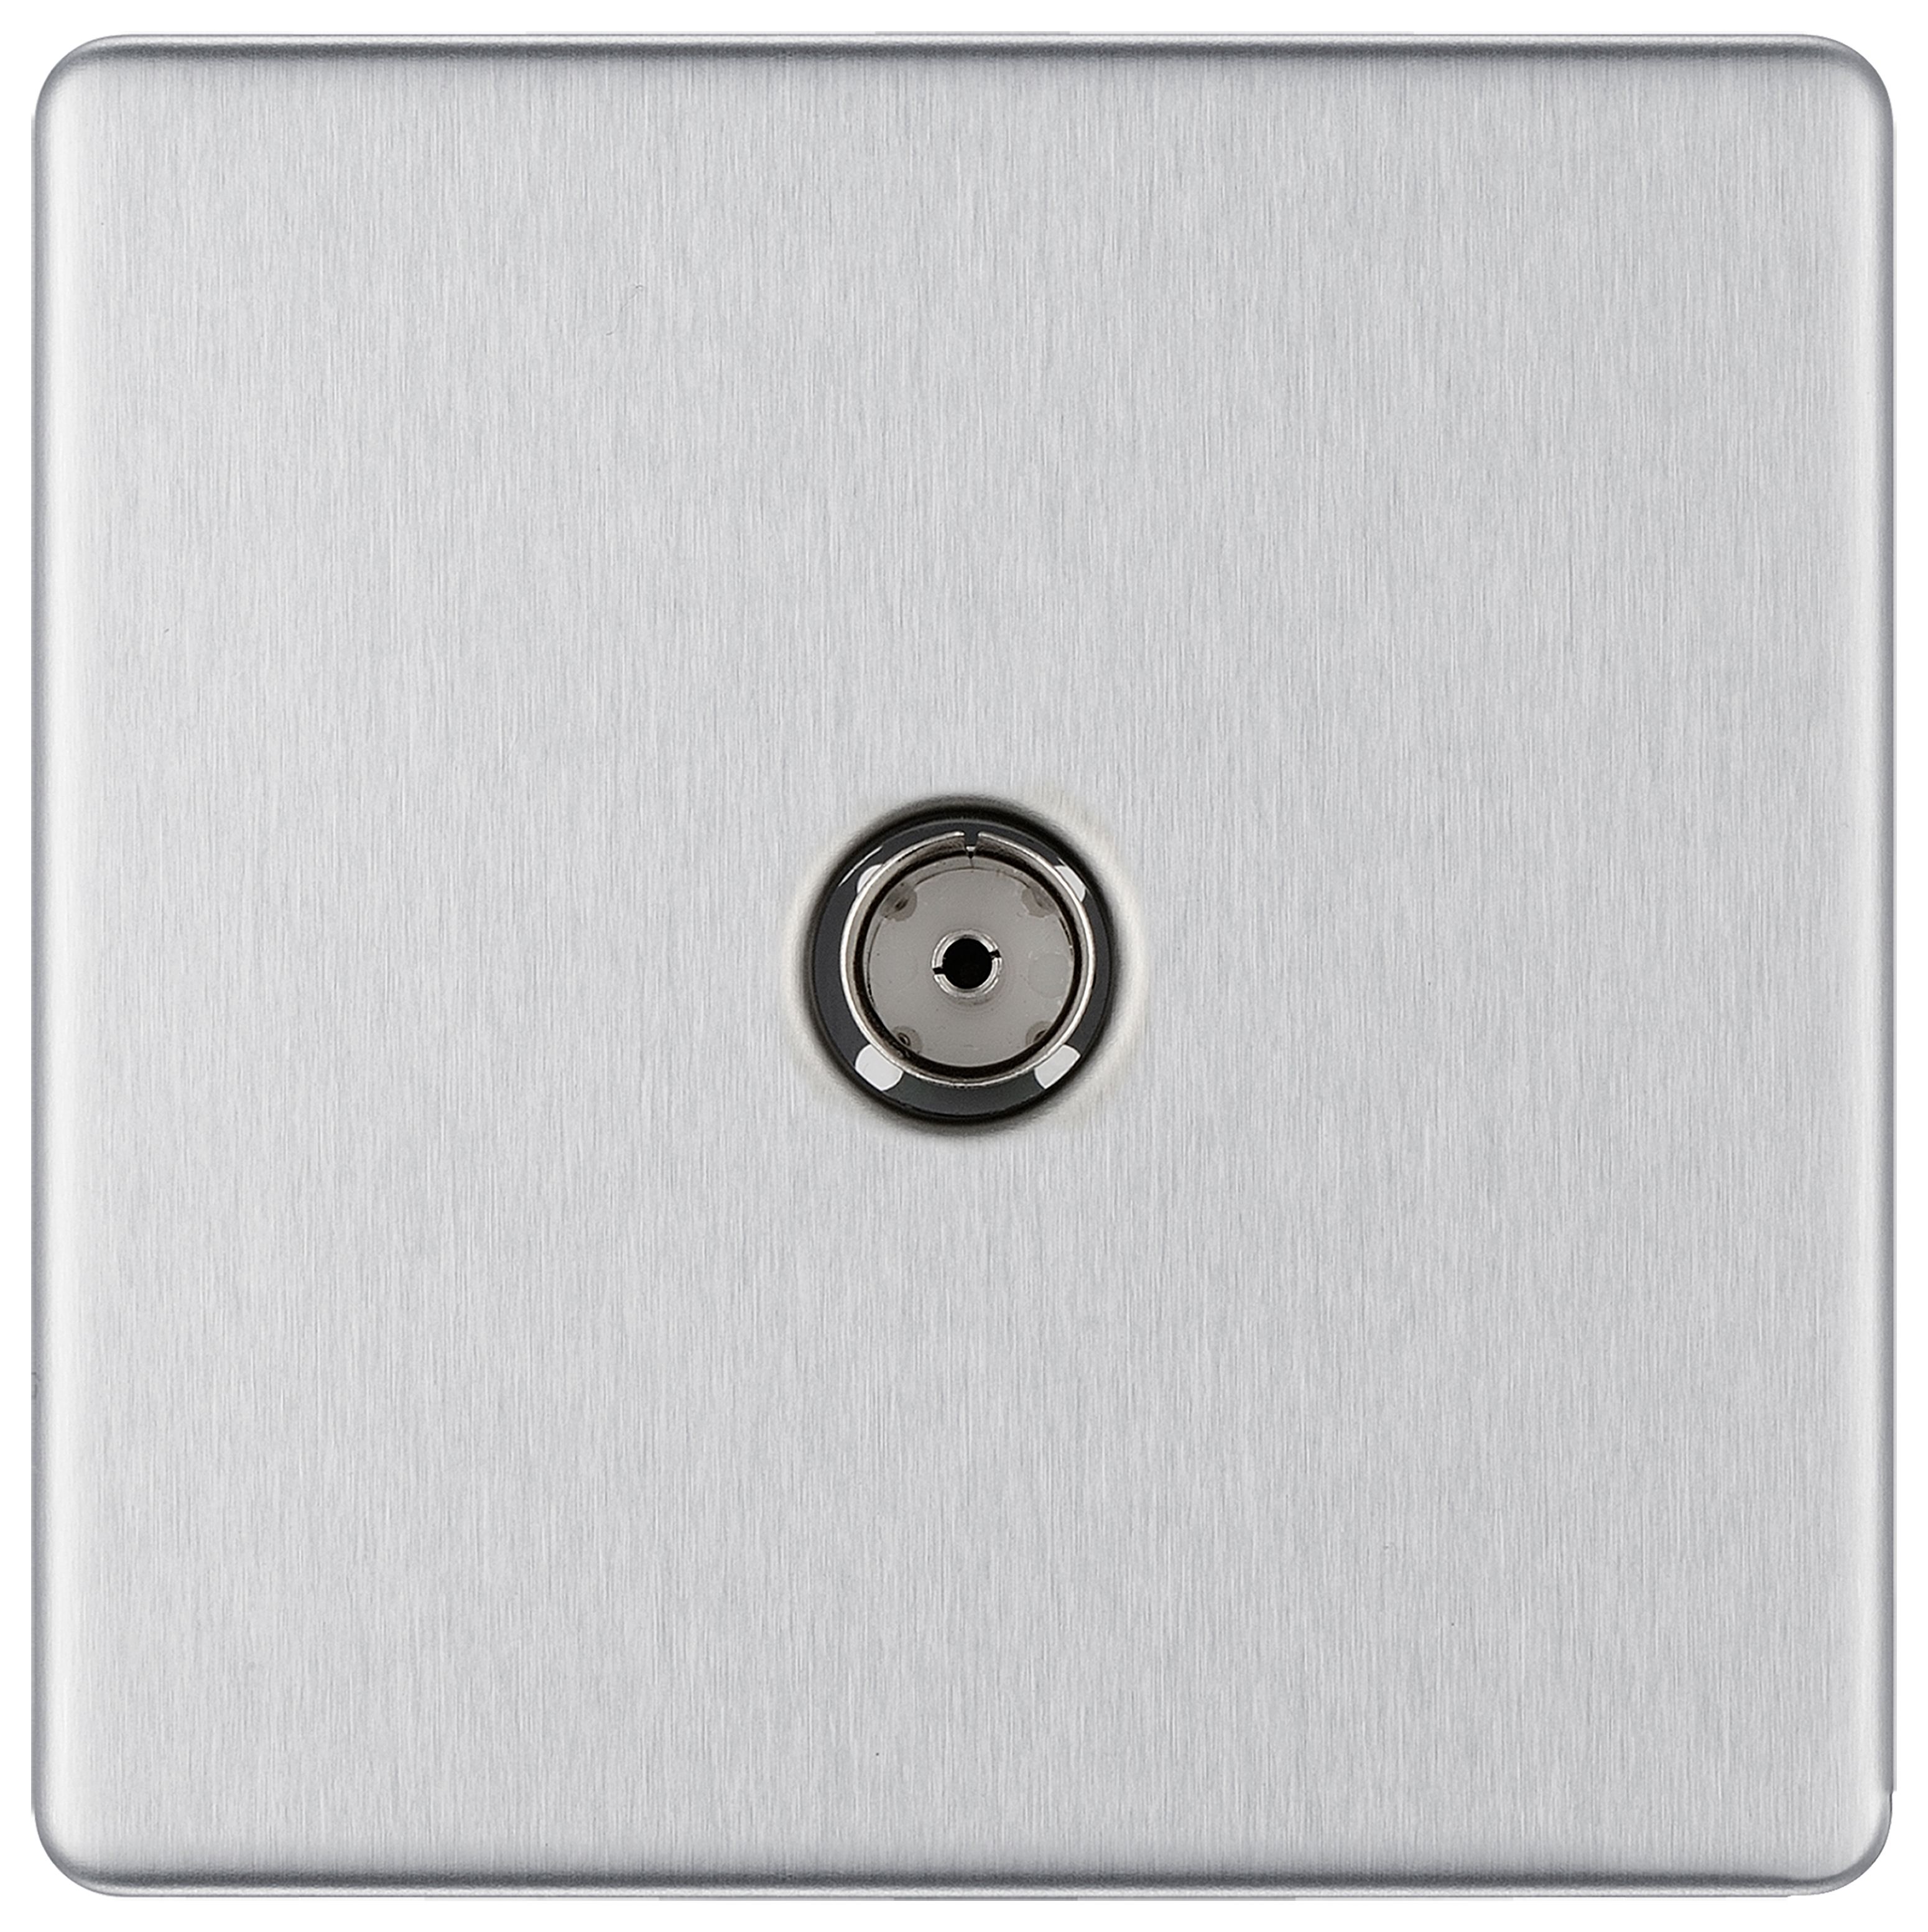 BG Screwless Flatplate Brushed Steel Single Socket For Tv Or Fm Co-Axial Aerial Connection